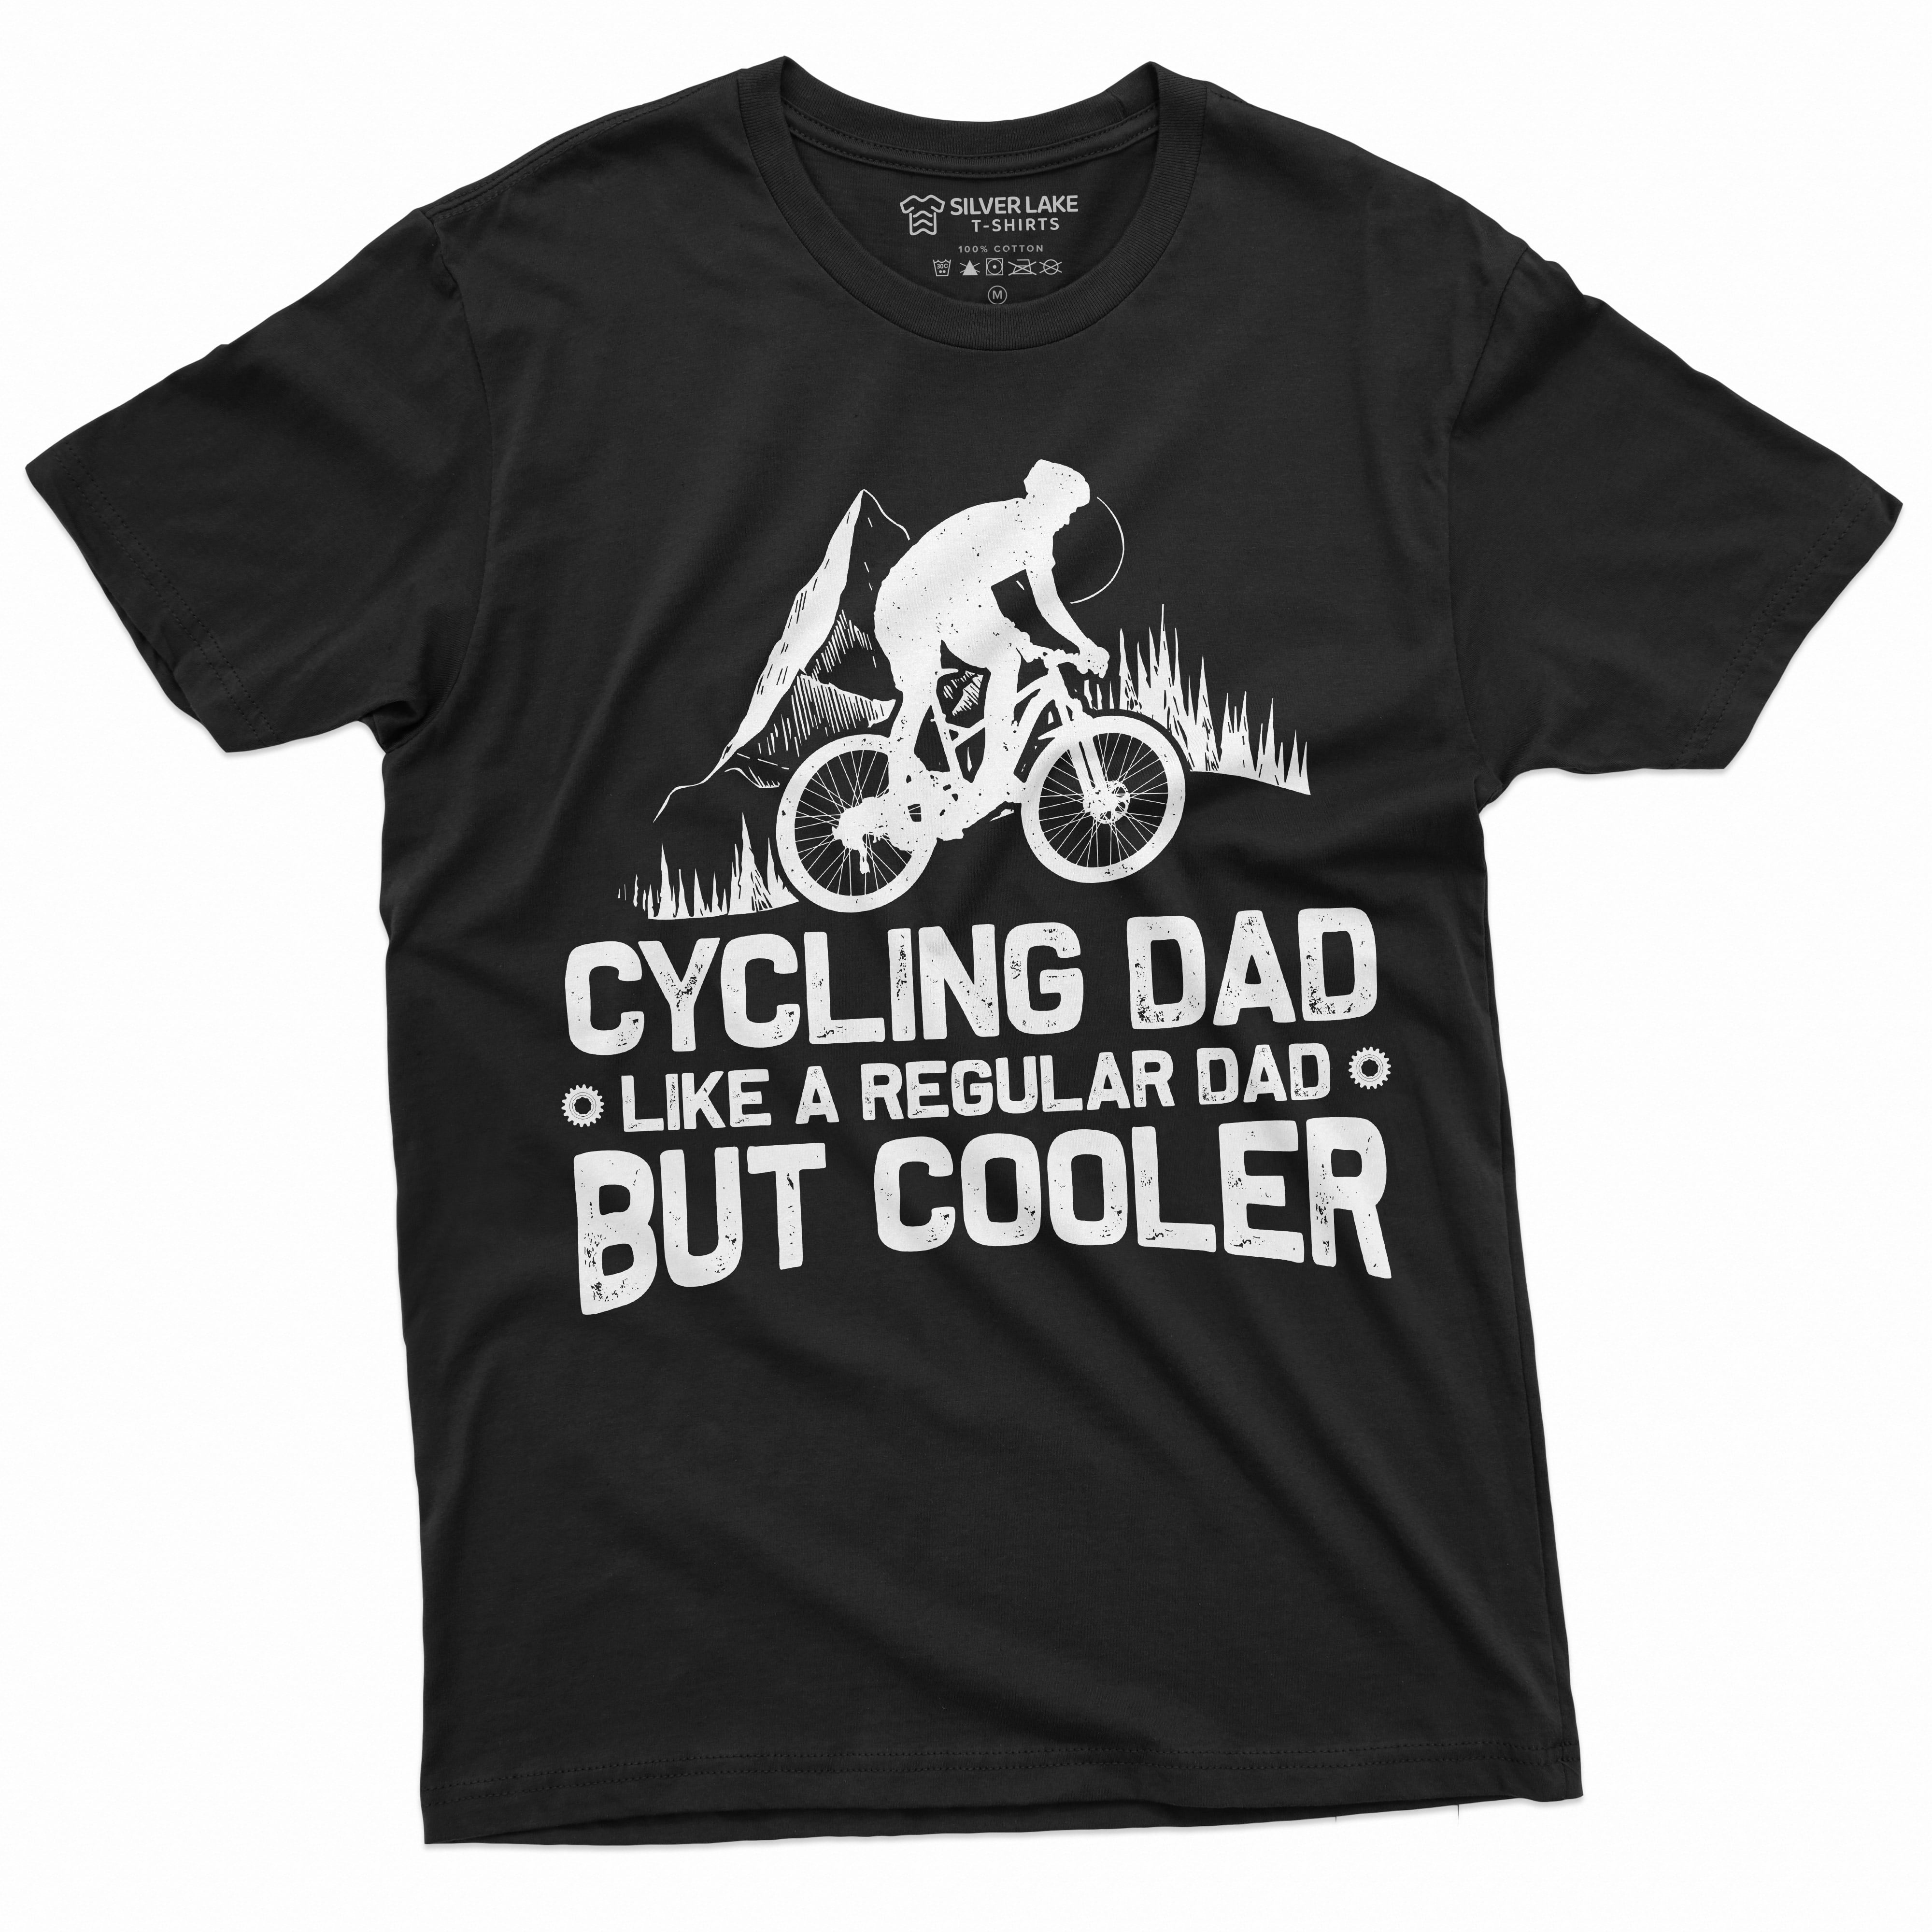 Cycling T-shirts, Funny Cycling T-shirts, Cycling Gifts, Cycling Lover,  Fathers Day Gift, Dad Birthday Gift, Cycling Humor, Cycling, Cycling Dad,  Cyclist Birthday, Cycling, Outdoors, Cycling Mom Gift, Dad Retirement Gift  - Funny